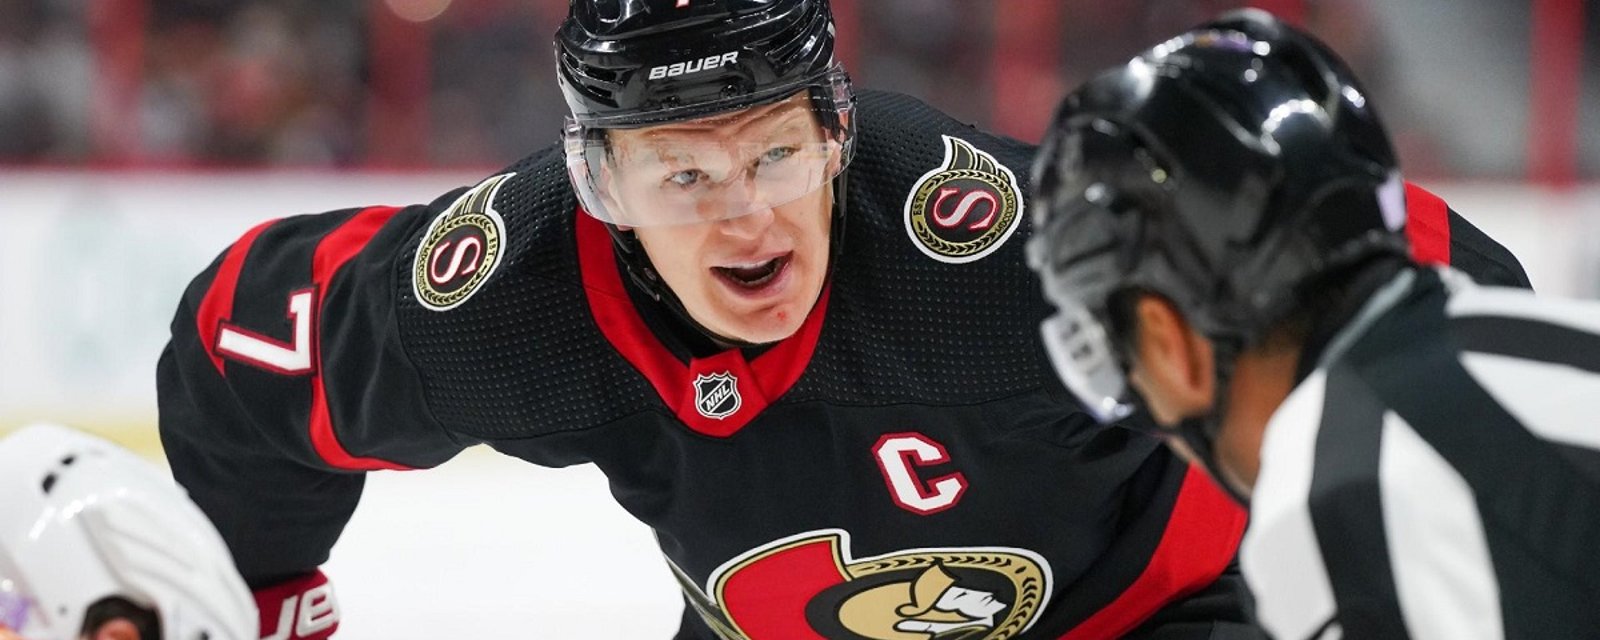 Brady Tkachuk speaks out after humiliating loss on Saturday.